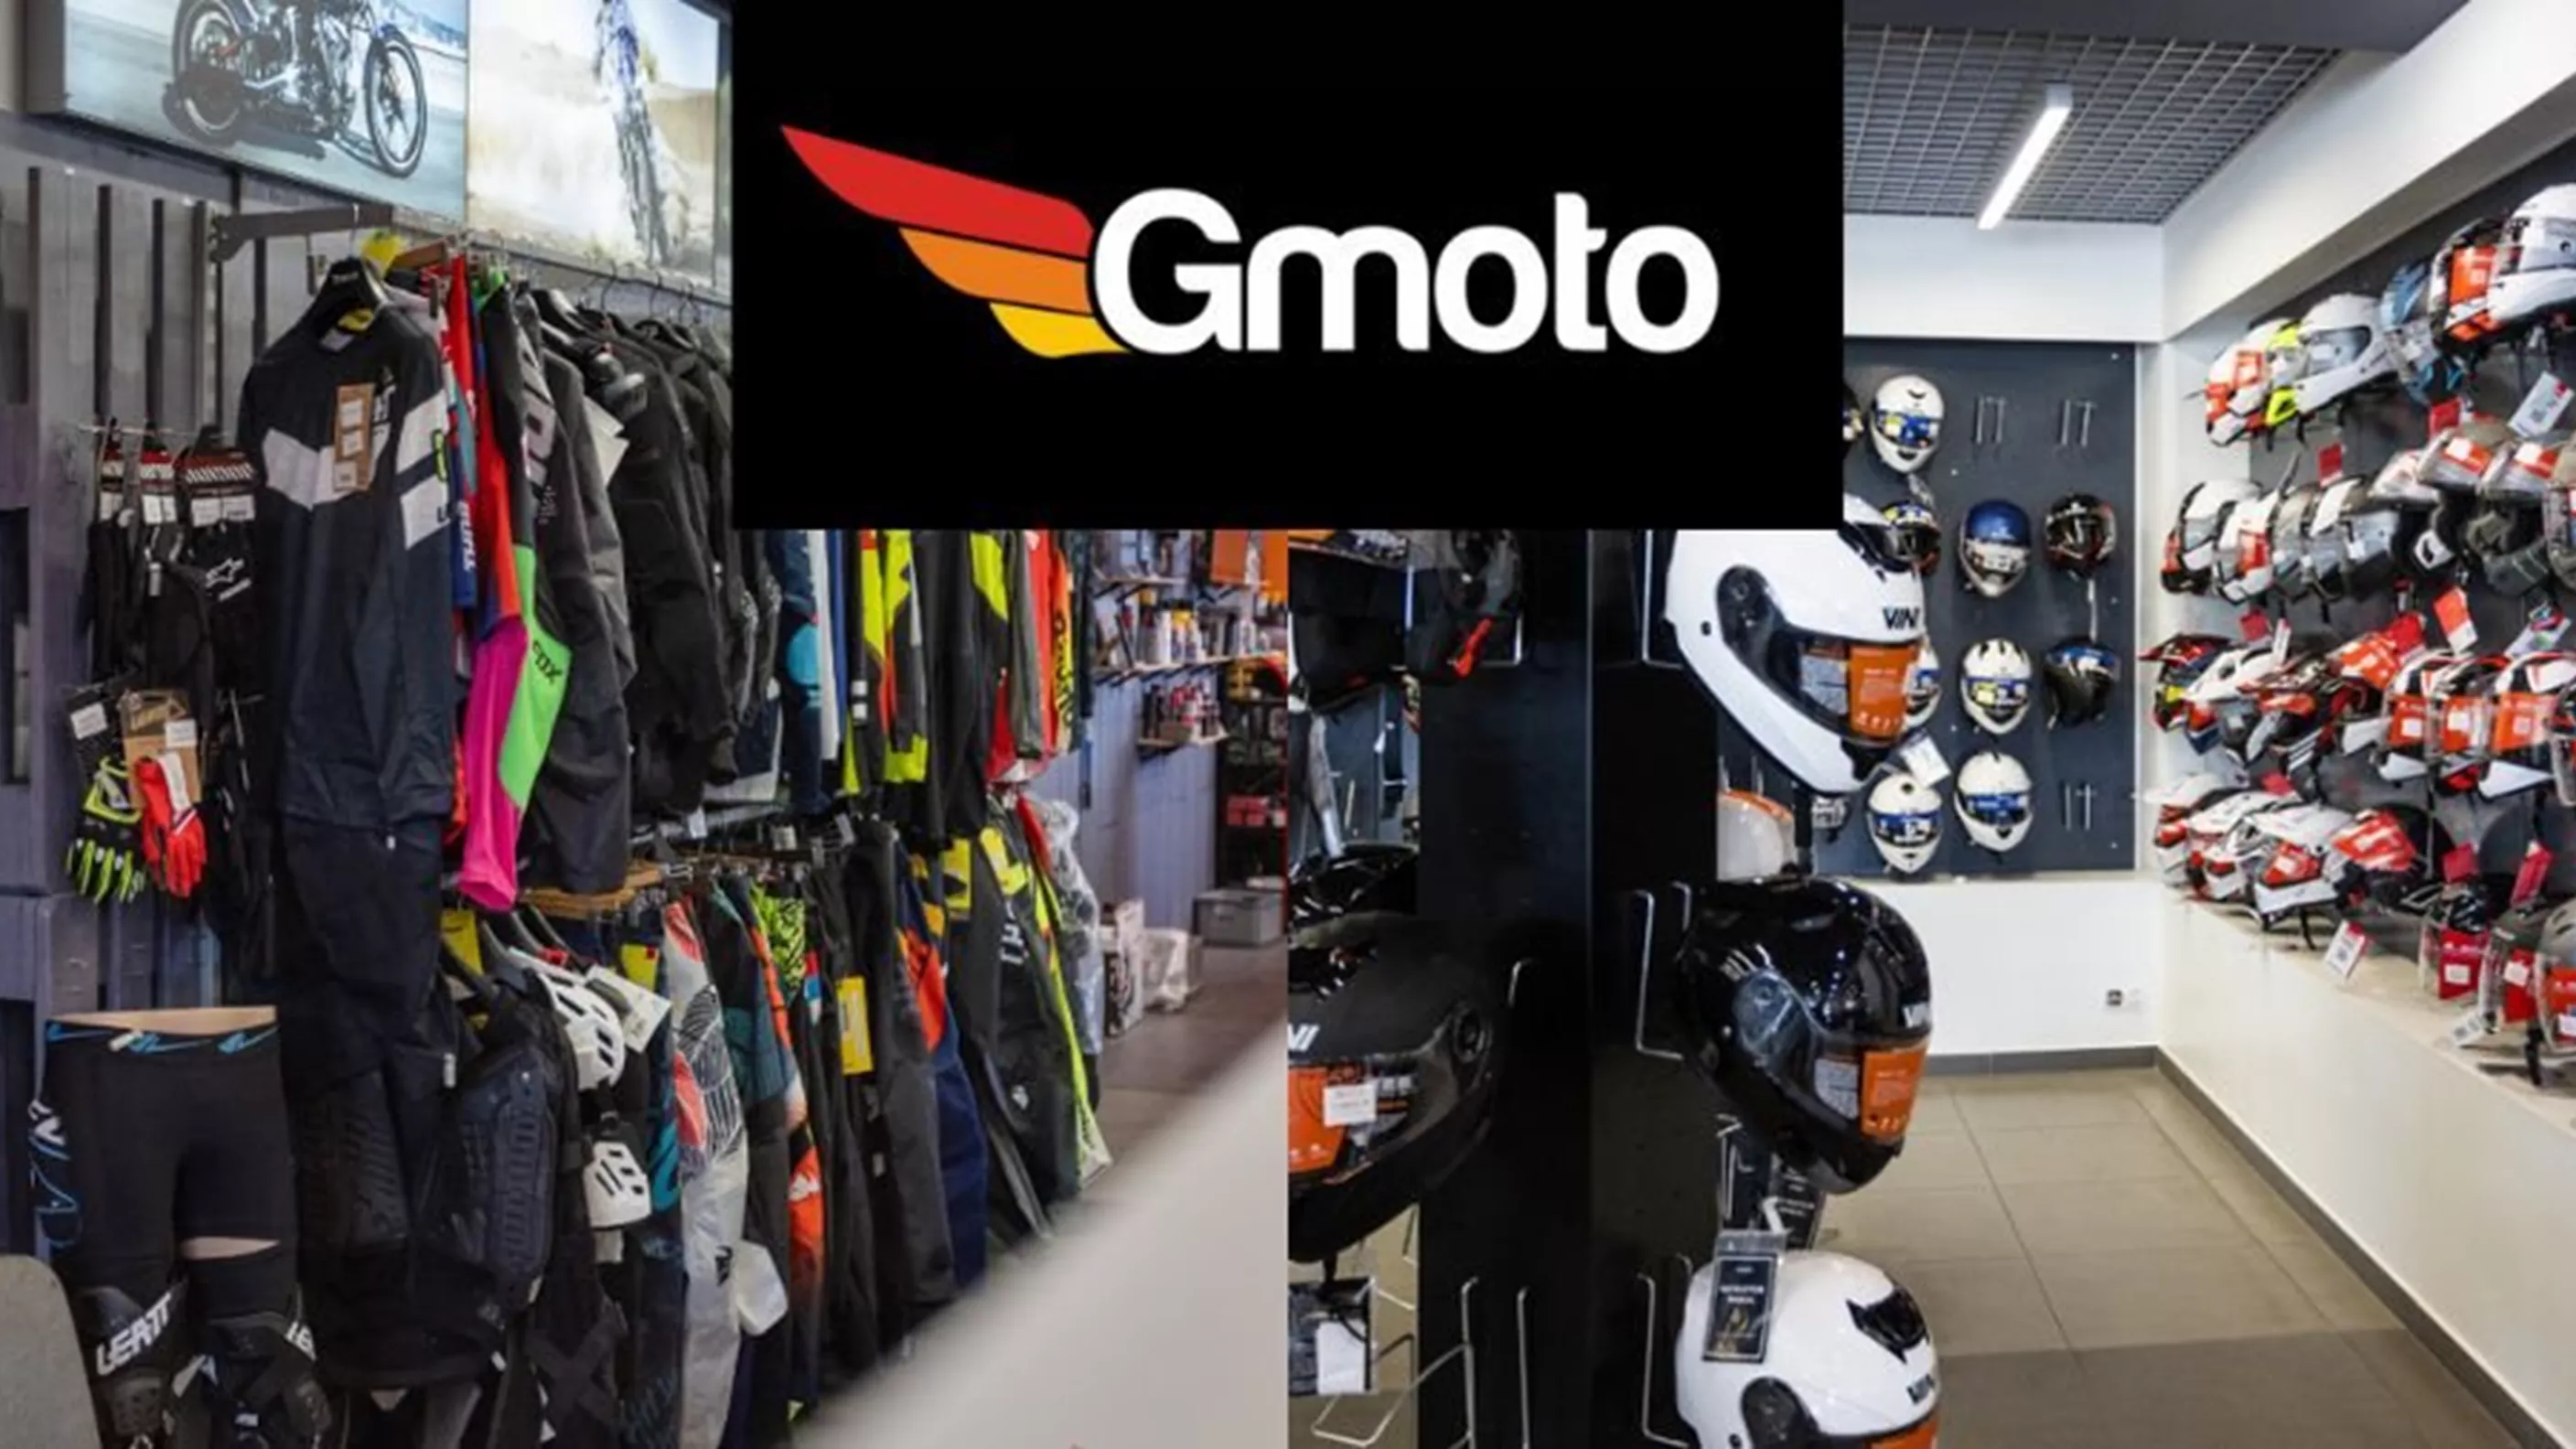 Gmoto - One of the largest online motorcycle stores in Europe